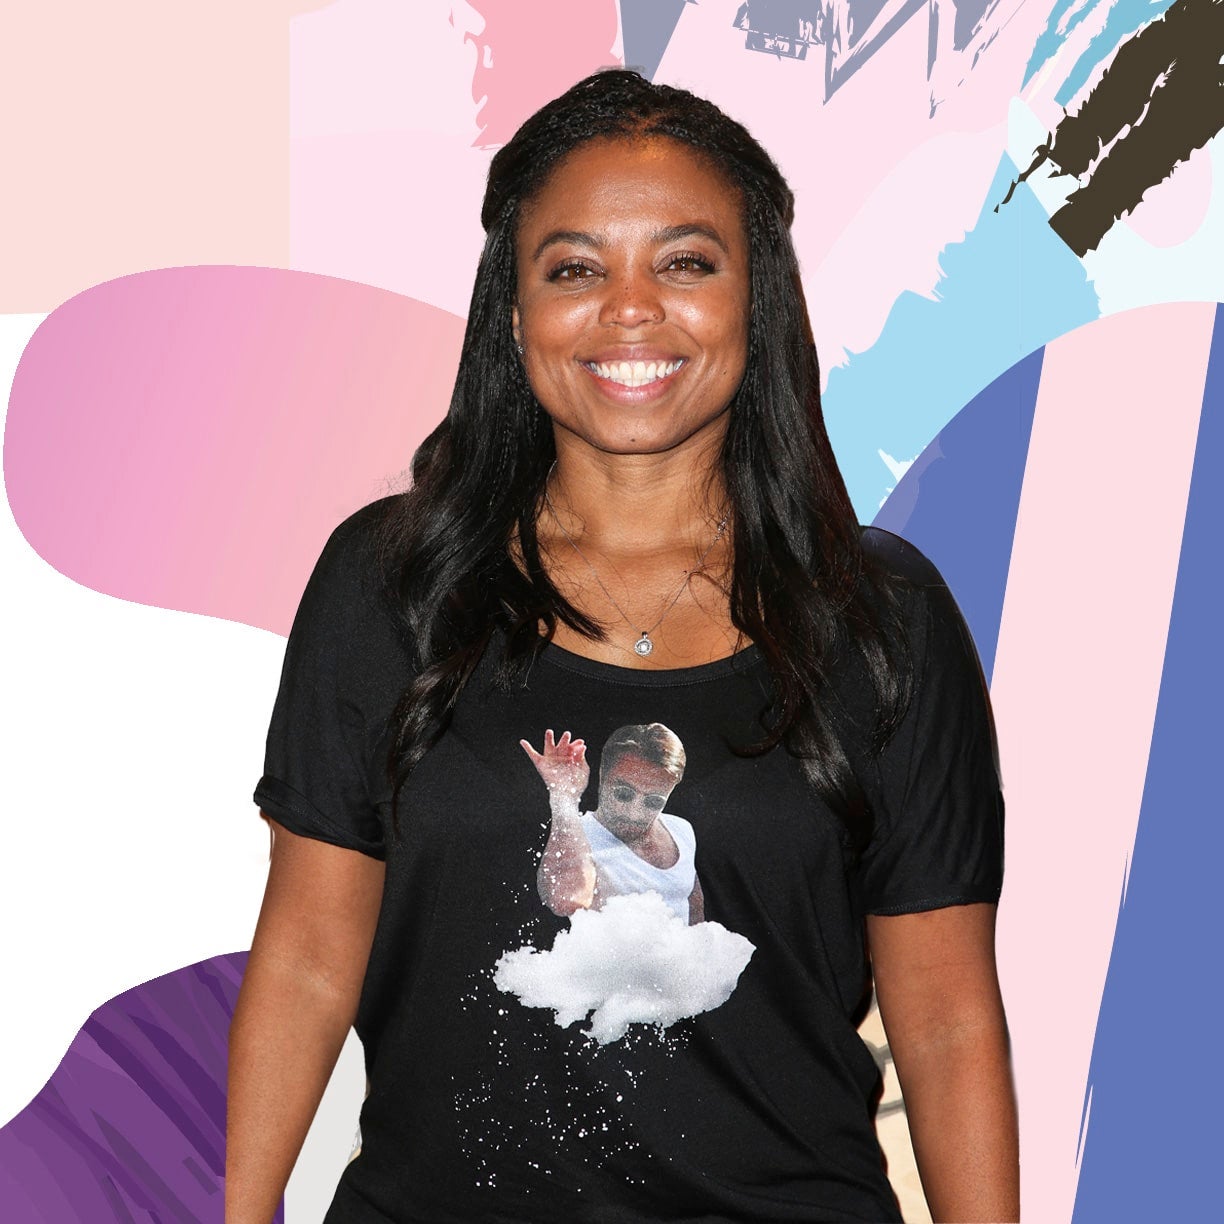 Jemele Hill Is Keeping The Door Open For Other Black Journalists So They Can 'Come Through It'